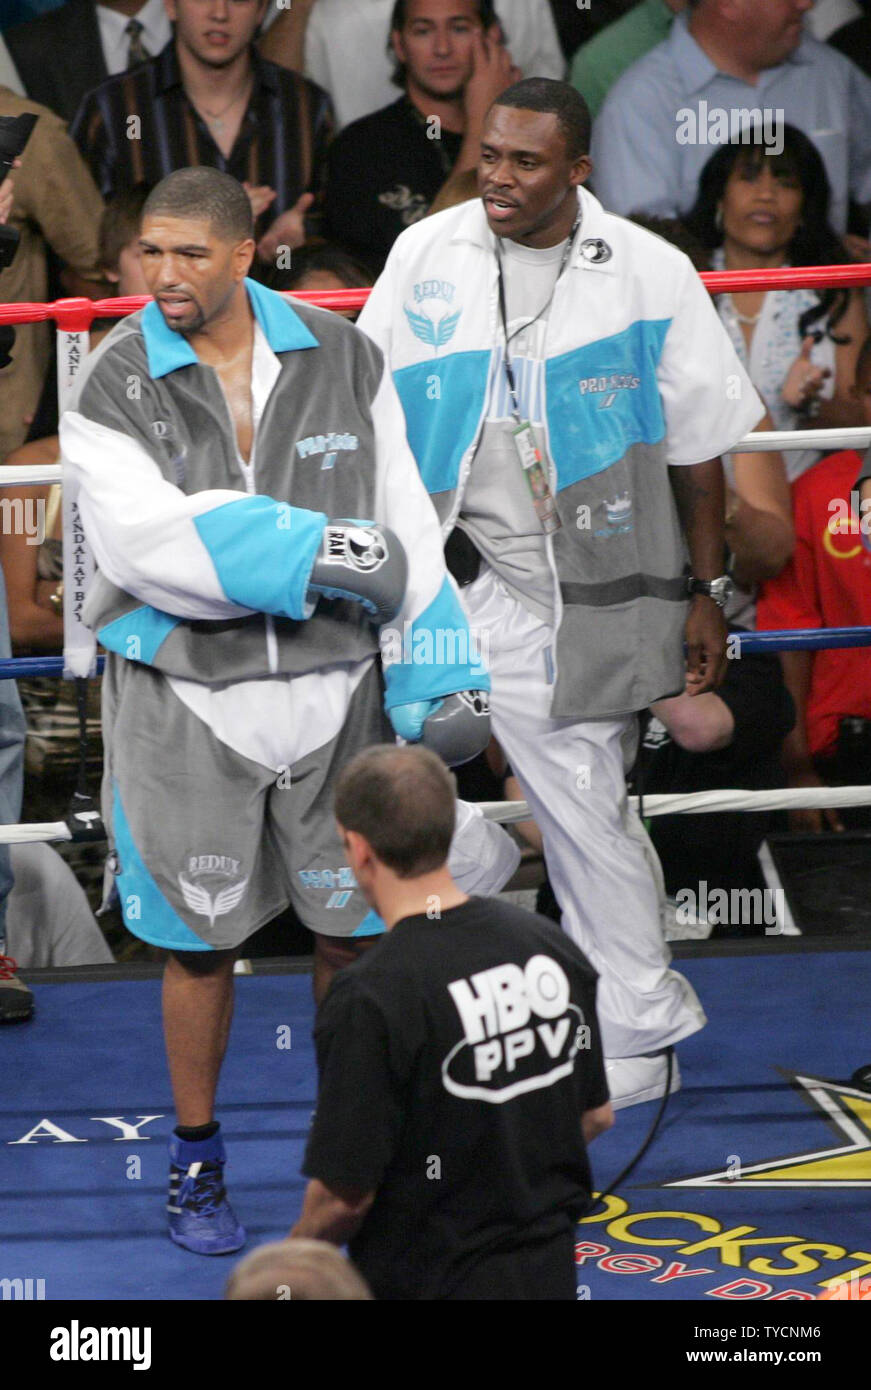 Challenger Winky Wright enters the ring for his fight with champion Bernard Hopkins for the Ring Magazine Light Heavyweight title at Mandalay Bay in Las Vegas on July 21, 2007.  (UPI Photo/Roger Williams) Stock Photo